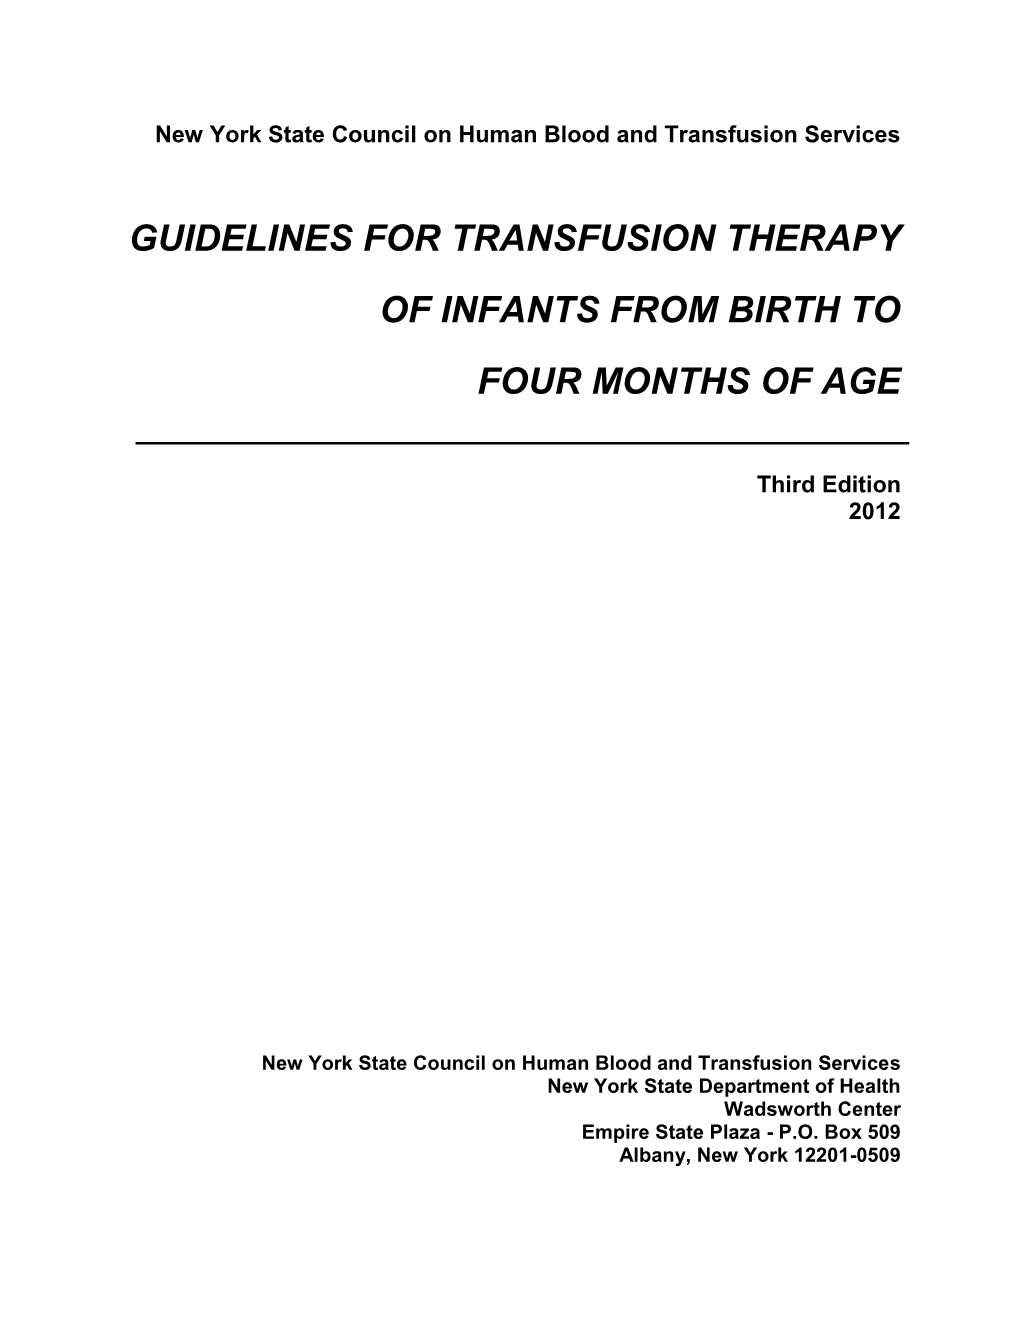 Guidelines for Transfusion Therapy of Infants from Birth to Four Months of Age